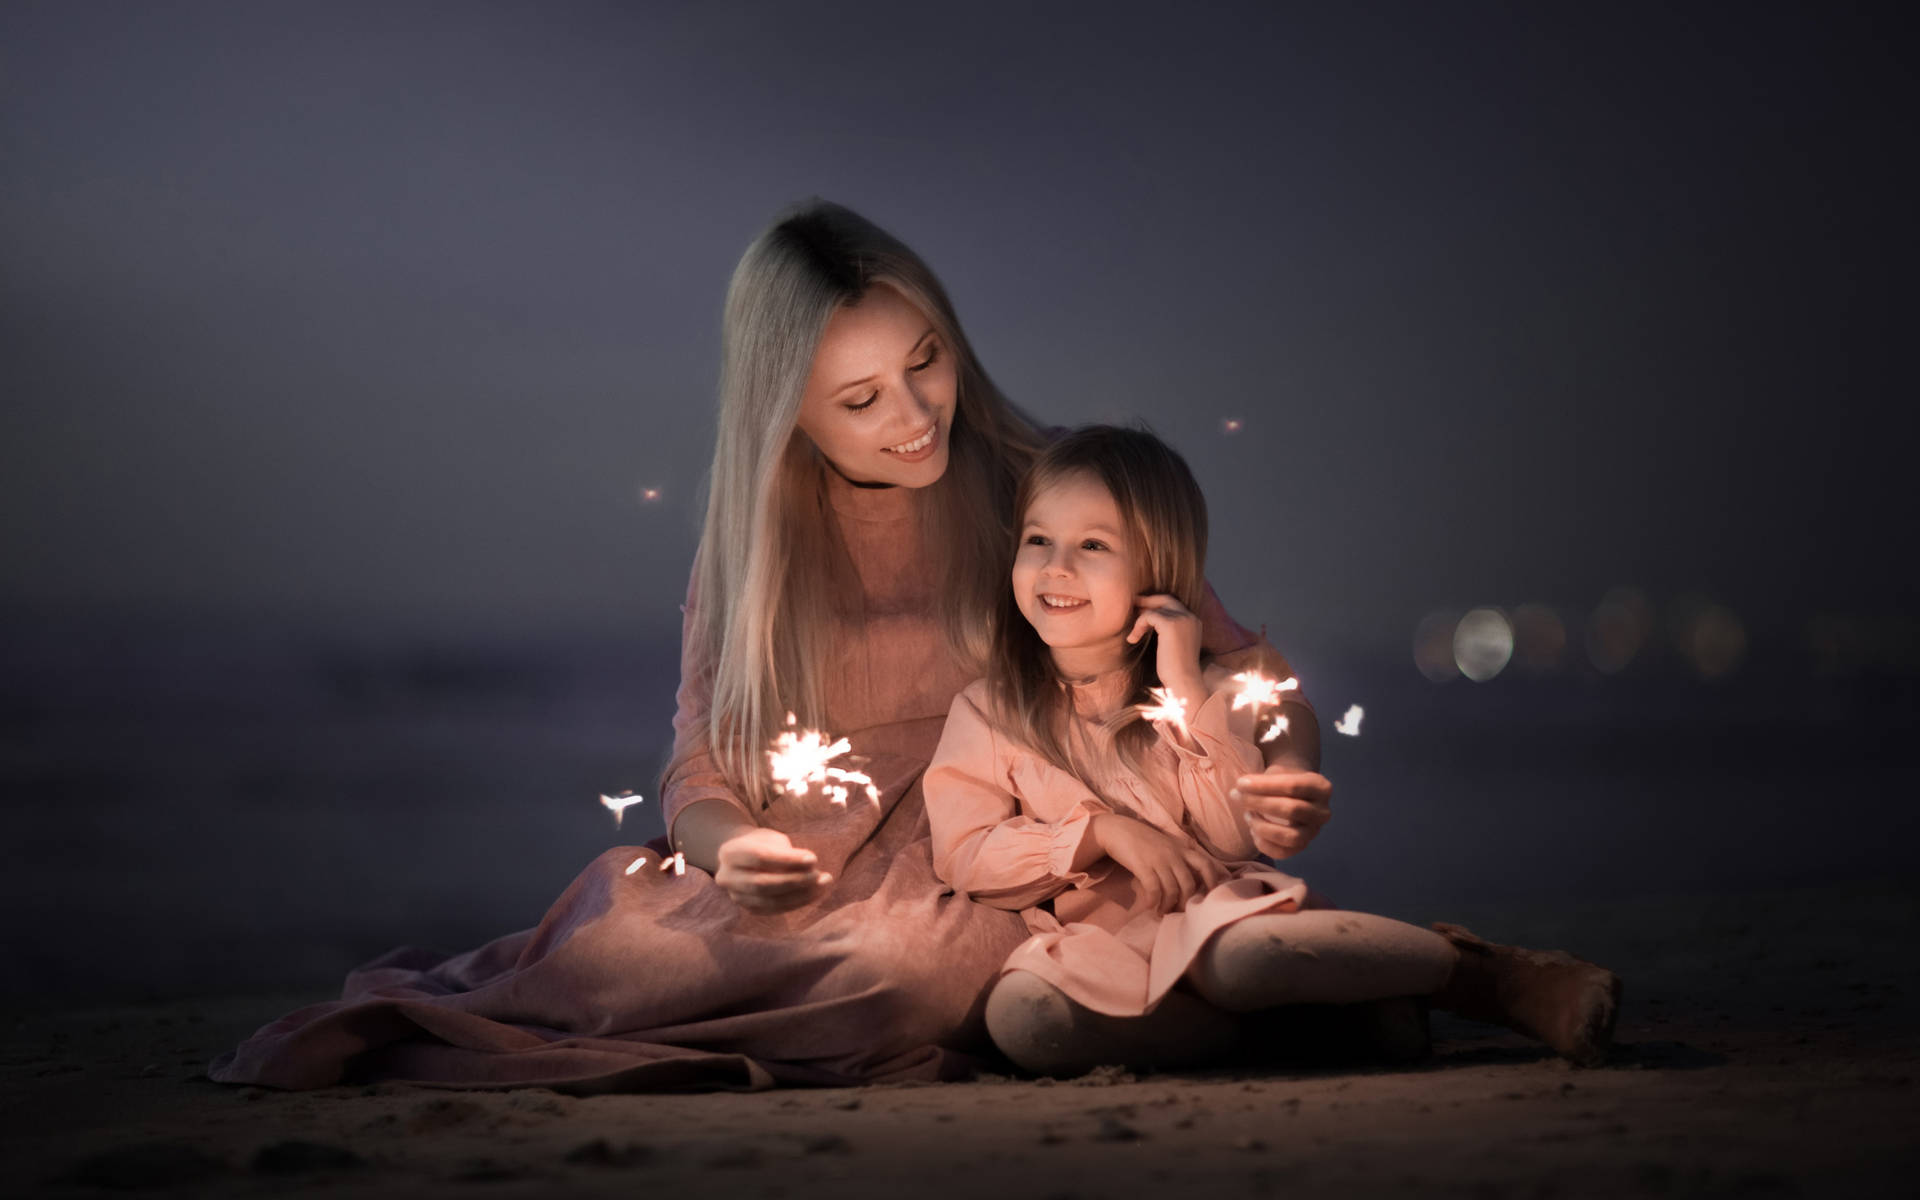 Free Mother And Daughter Wallpaper Downloads, [100+] Mother And Daughter  Wallpapers for FREE 